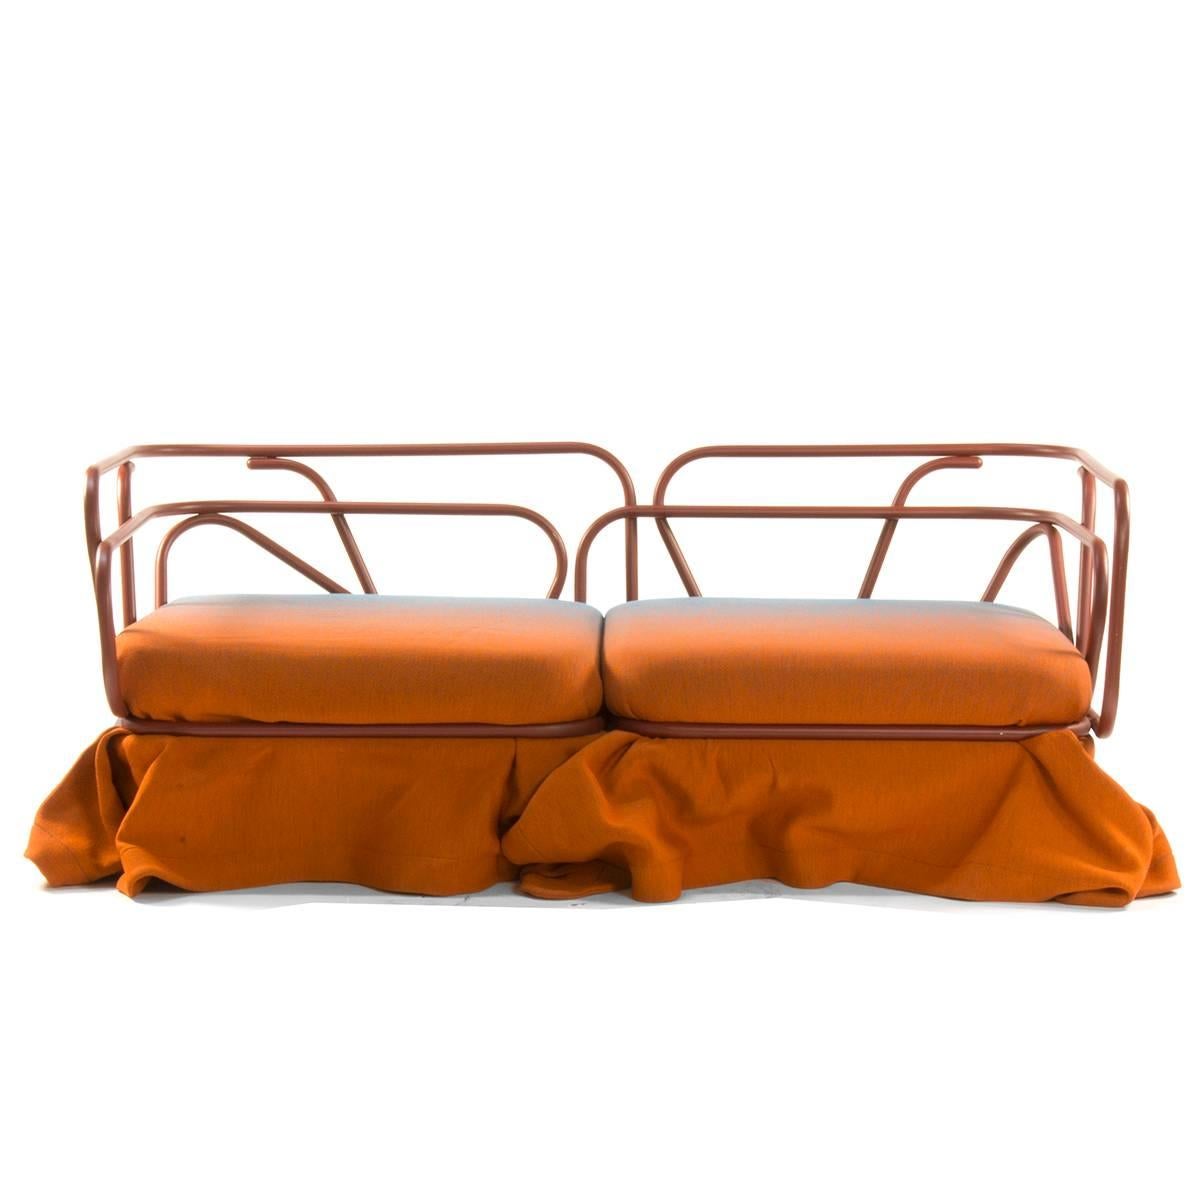 Moroso Metal Frame Oasis Daybed Sofa by Atelier Oi, Italy In Good Condition For Sale In Brooklyn, NY